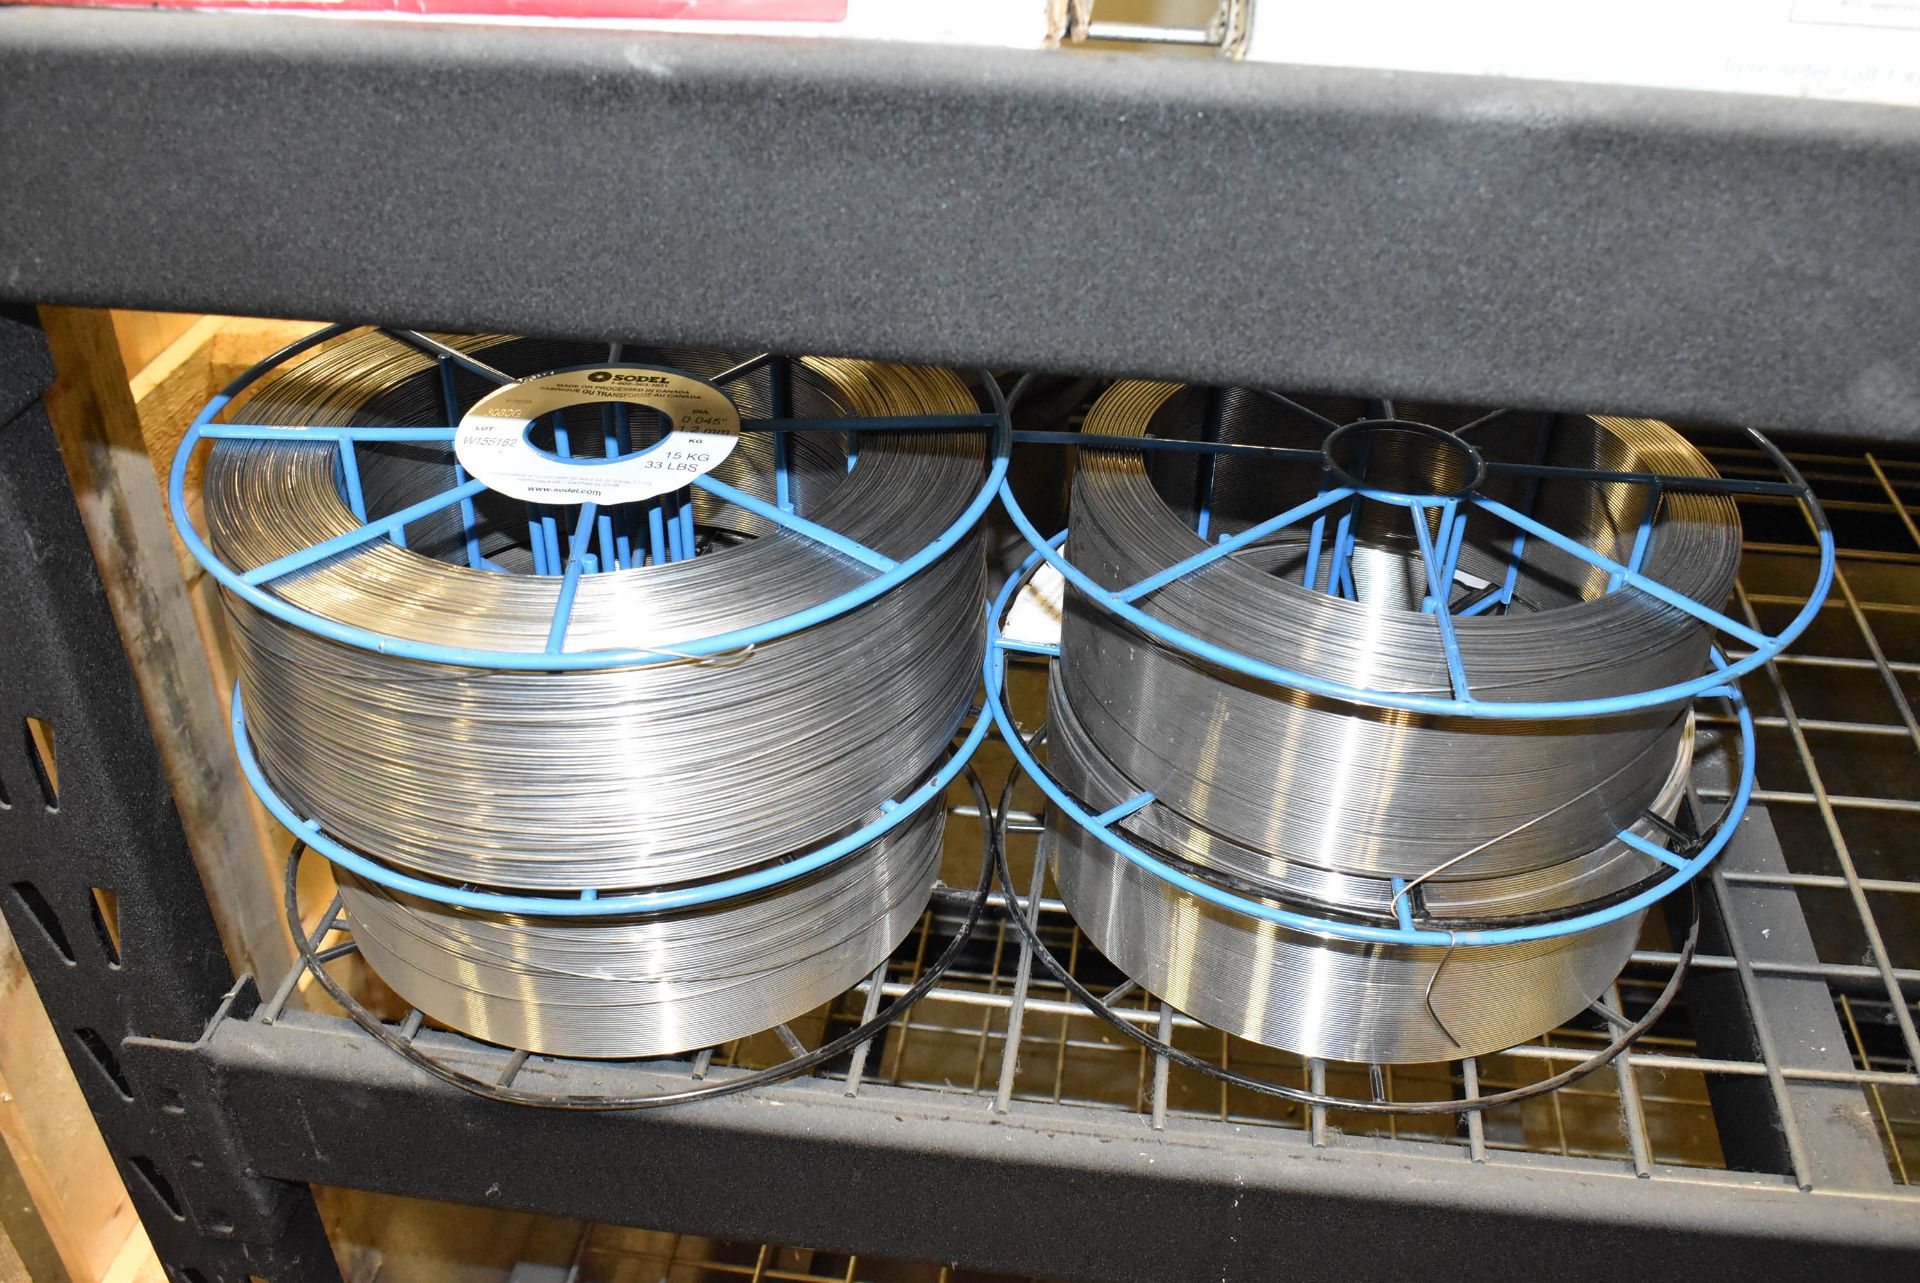 LOT/ SHELF WITH CONTENTS CONSISTING OF WELDING WIRE AND ELECTRODES - Image 8 of 8